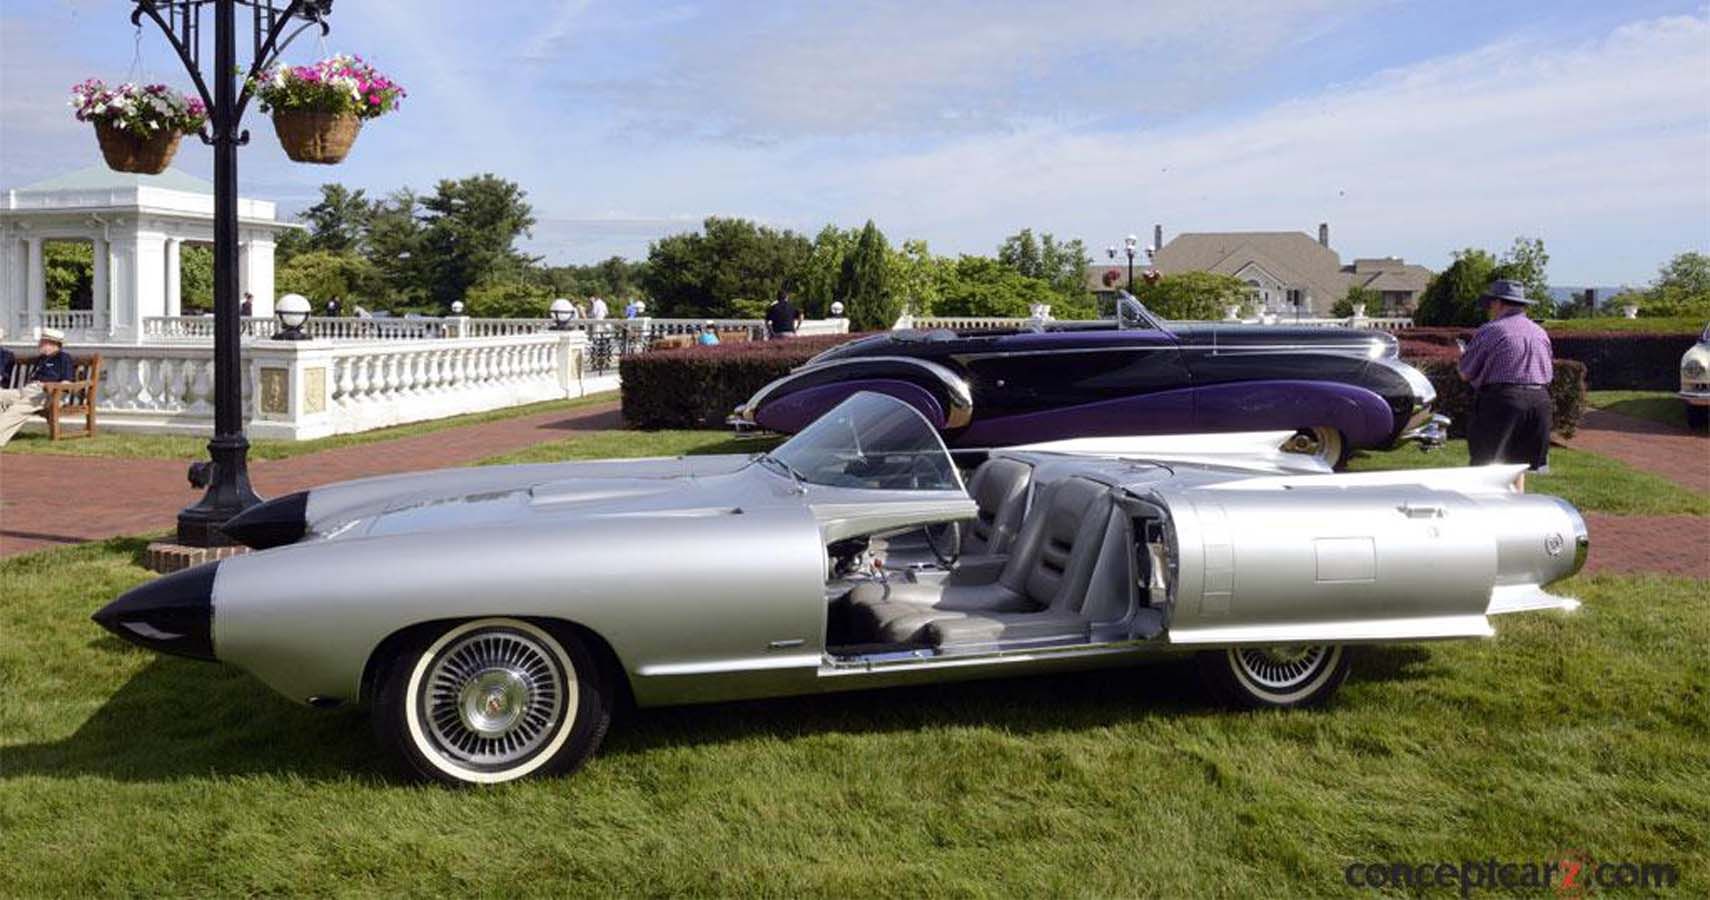 The Doors Of 1959 Cadillac Cyclone Concept Car Were Sliding, Like The Kind We See On Vans Today, Although No Modern Cars Were Able To Take Cues From It